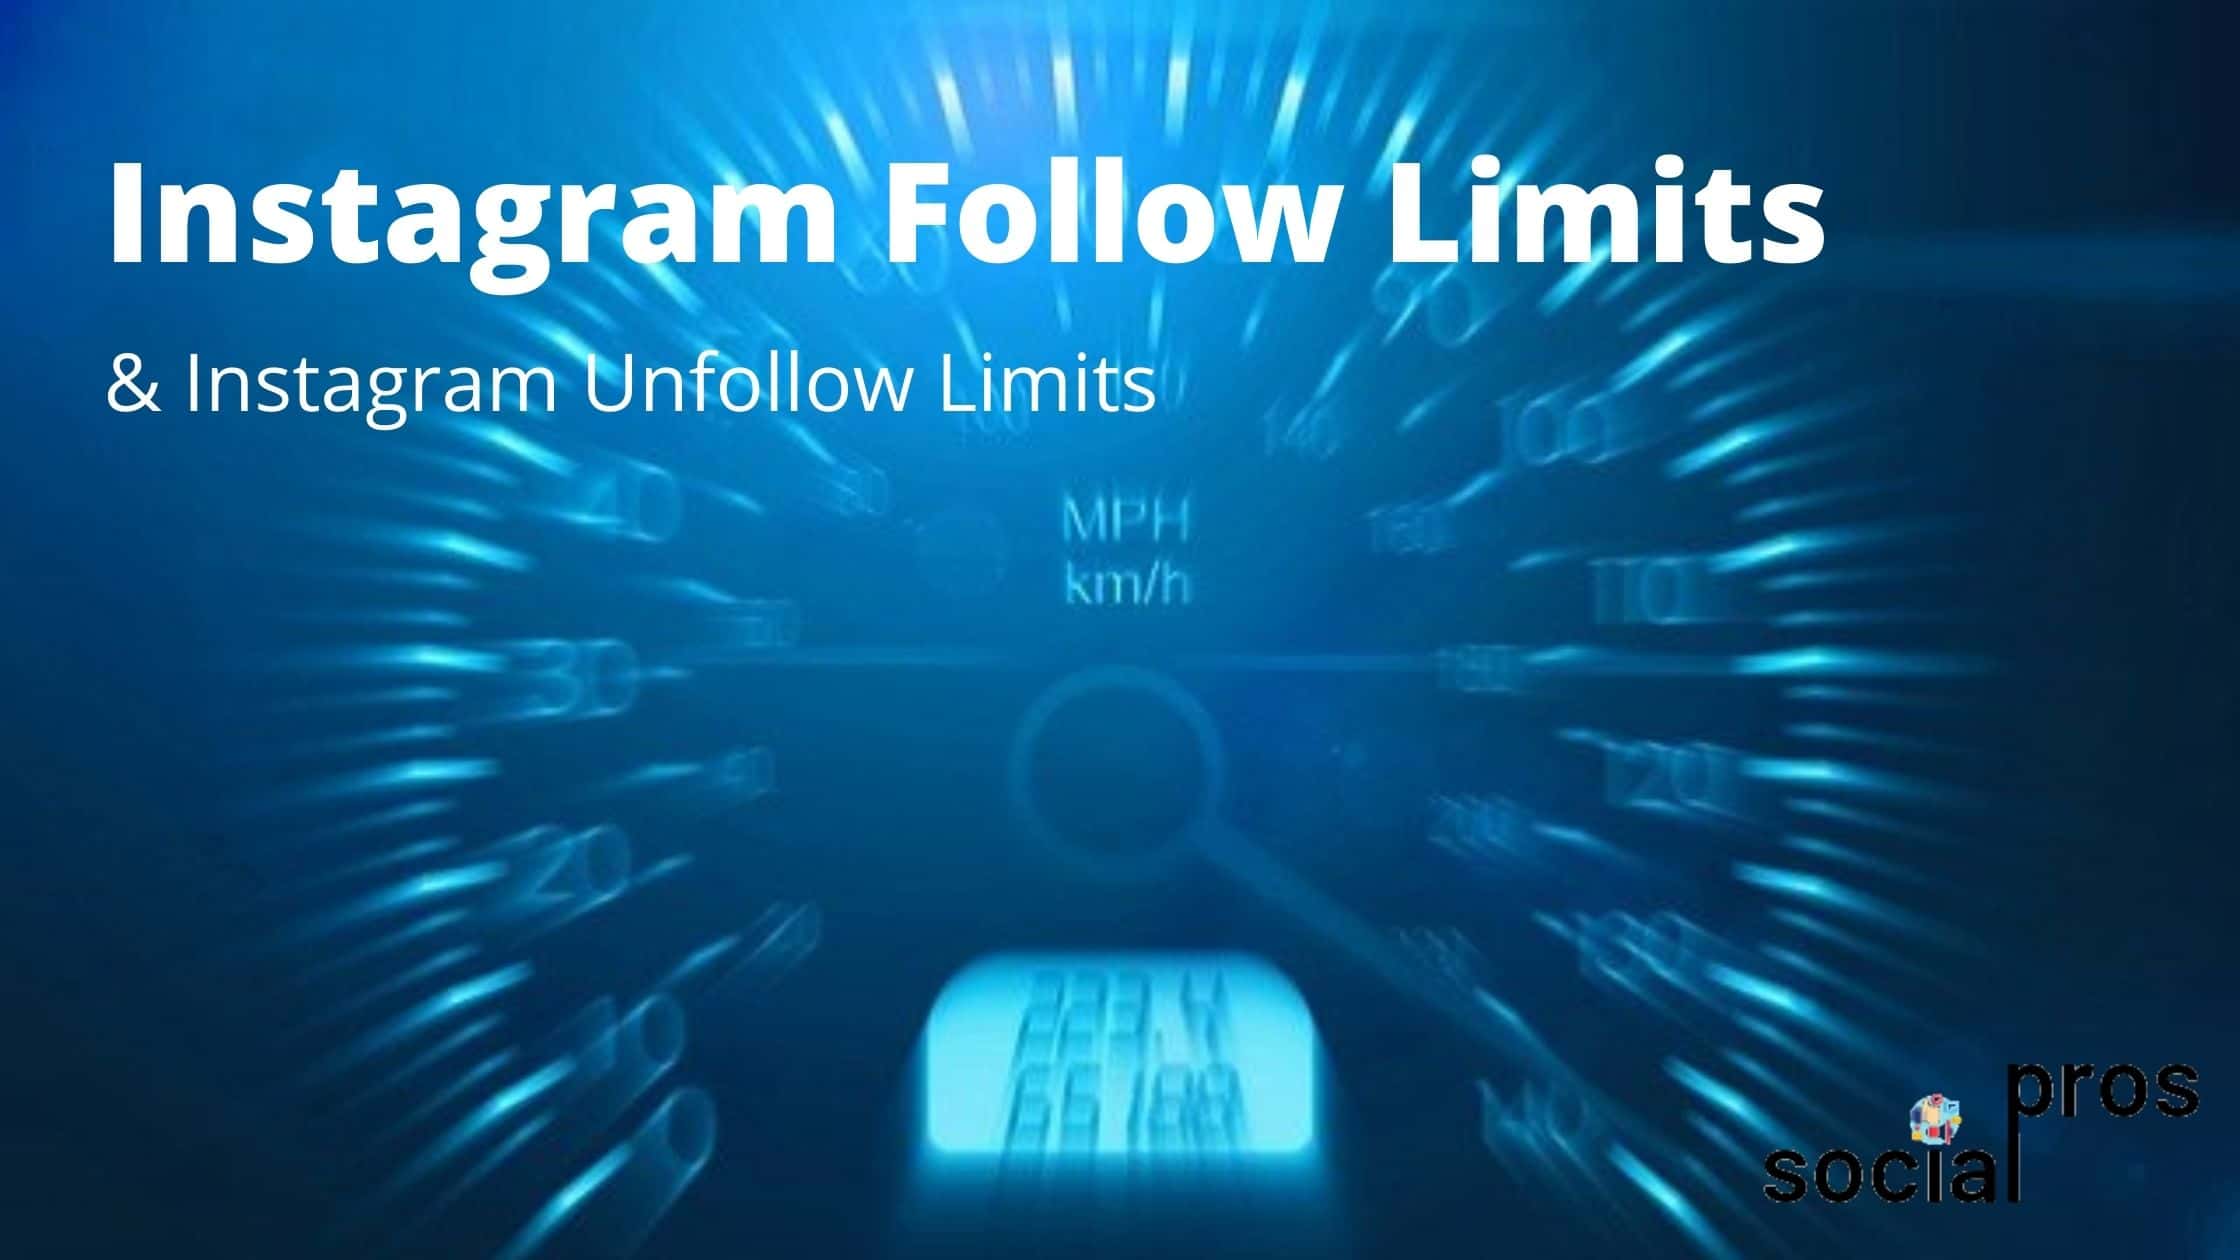 Feature image embeds "Instagram follow limits and Instagram unfollow limits